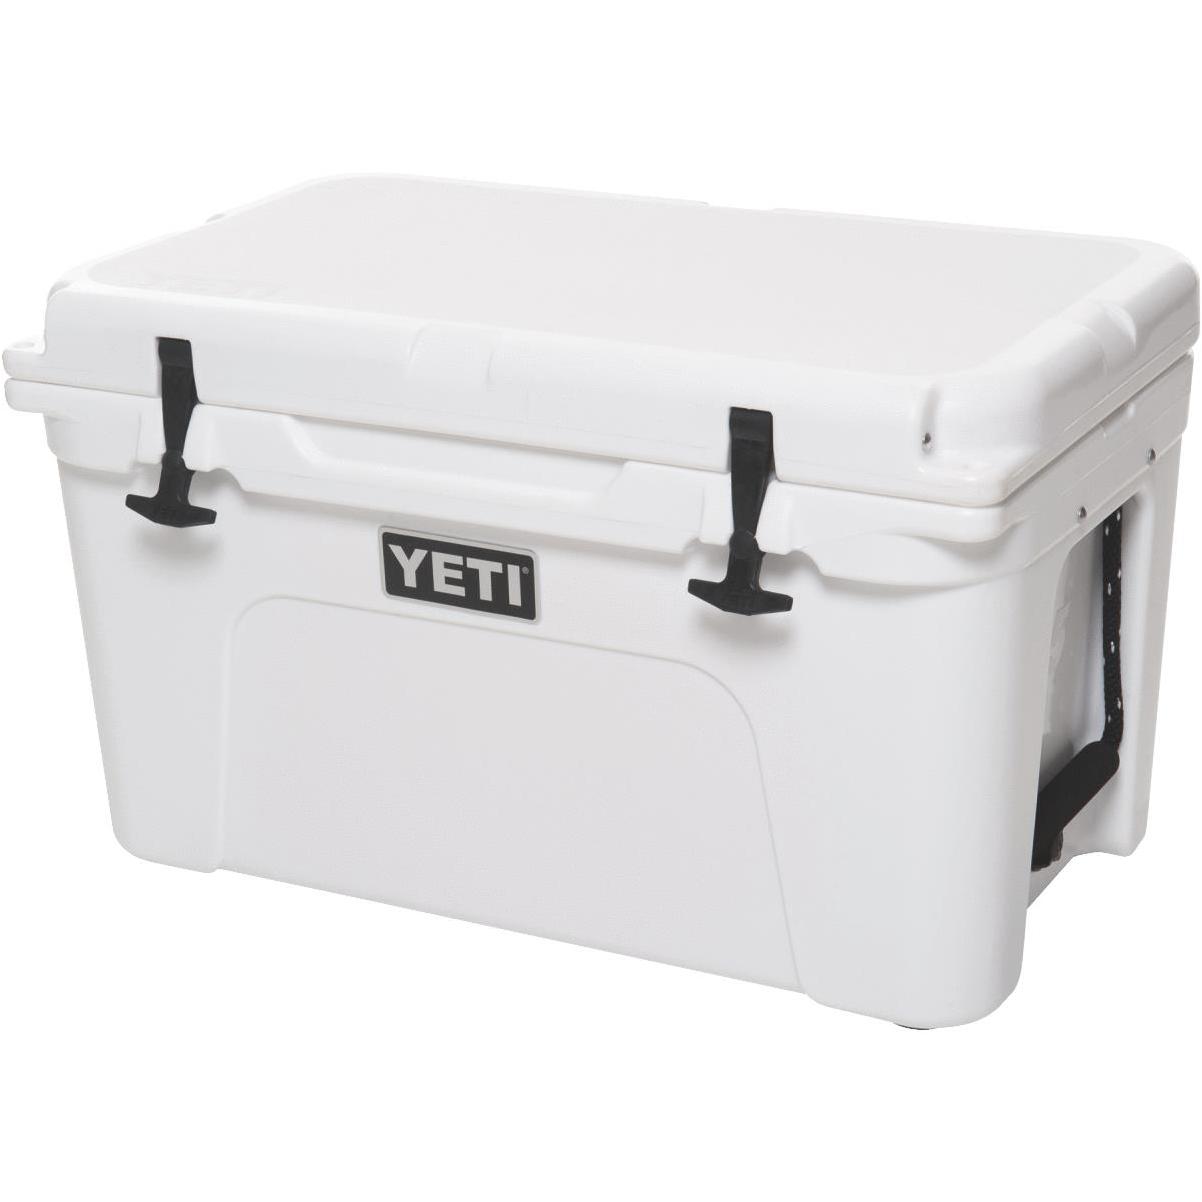 Yeti Hopper Two 30 Tan Soft-Side Cooler (23-Can) - Groom & Sons' Hardware